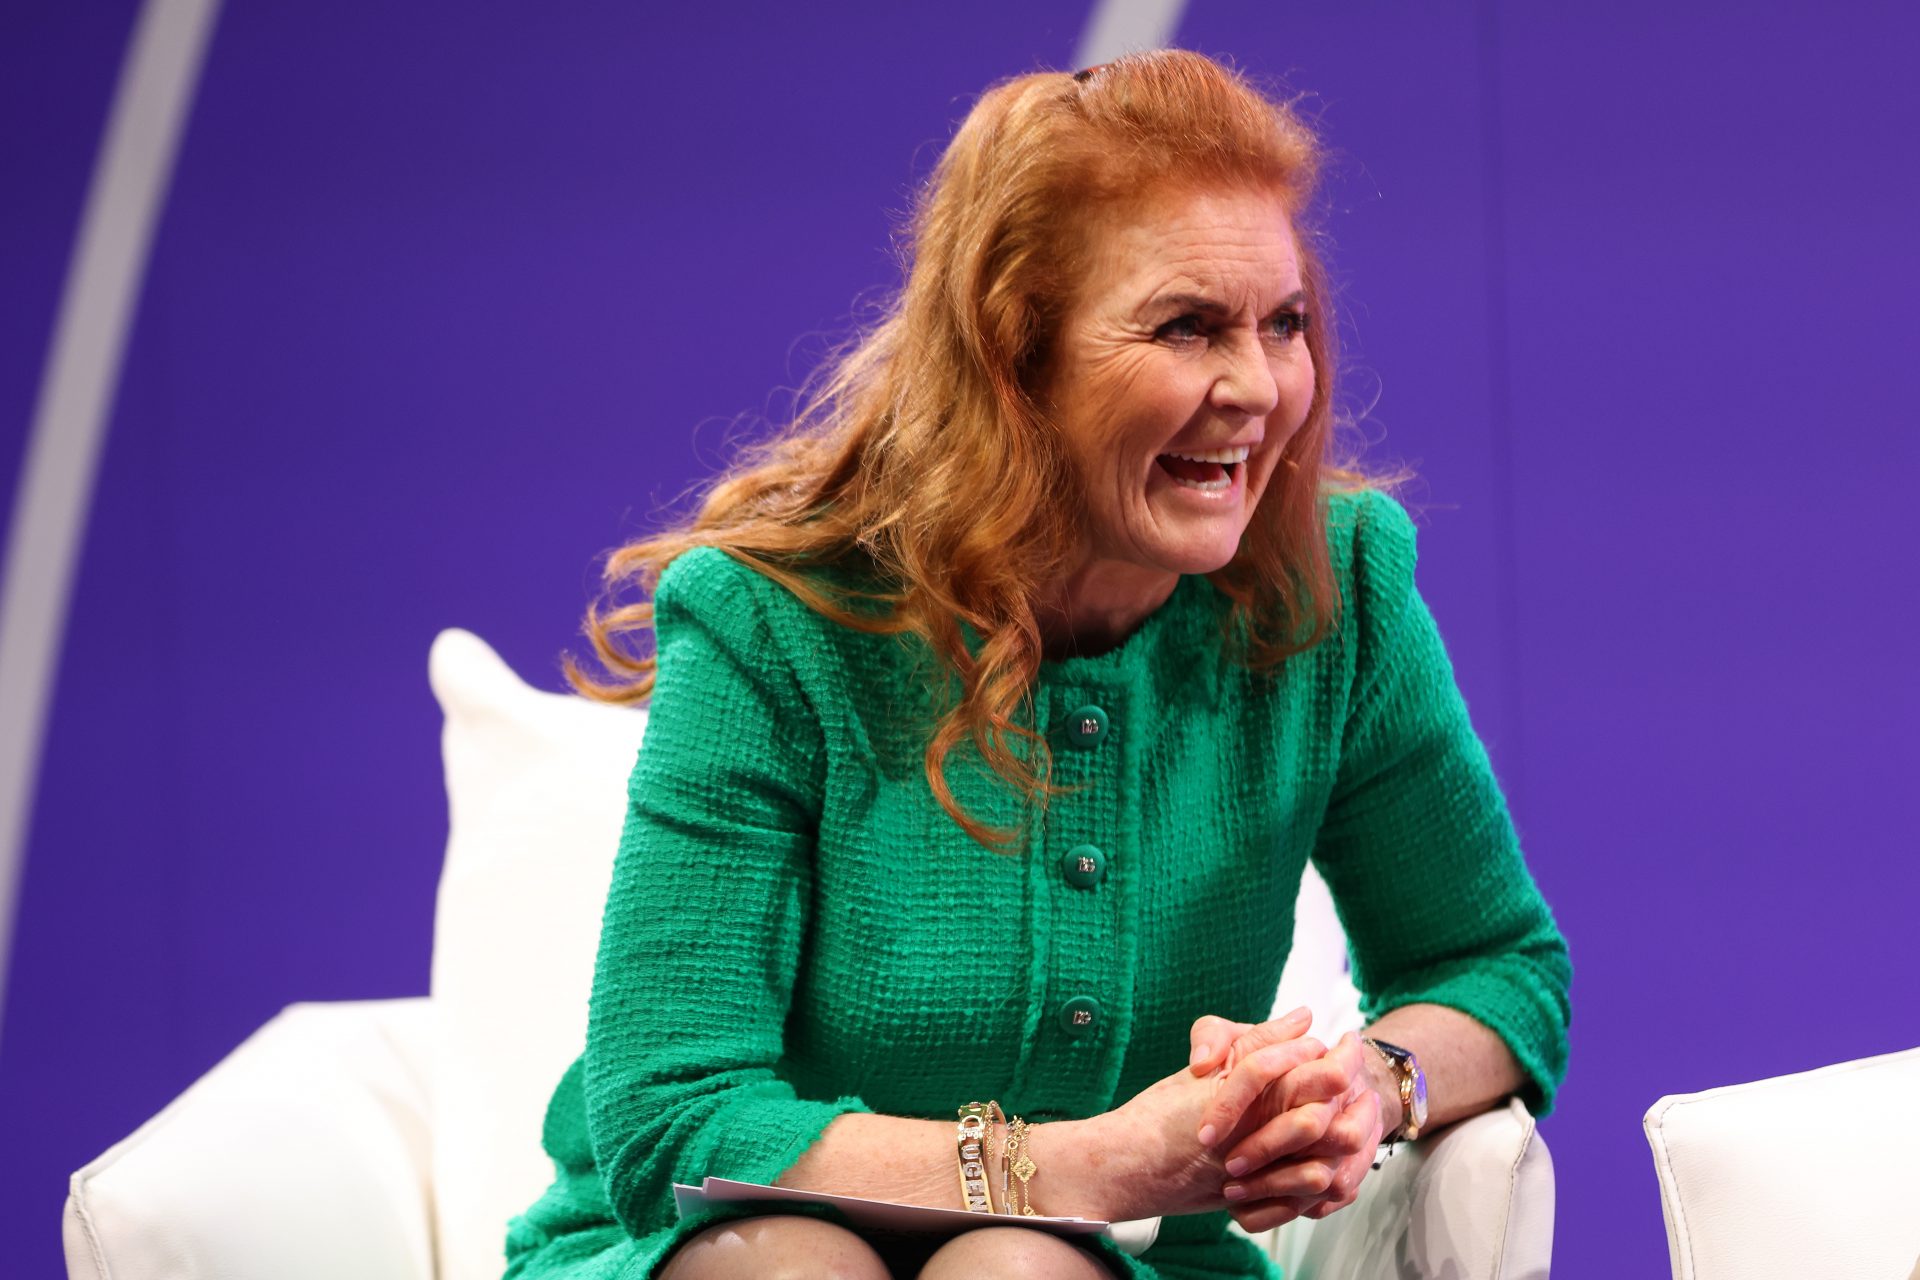 Sarah, Duchess of York, 'free from cancer': the royal family battles the disease